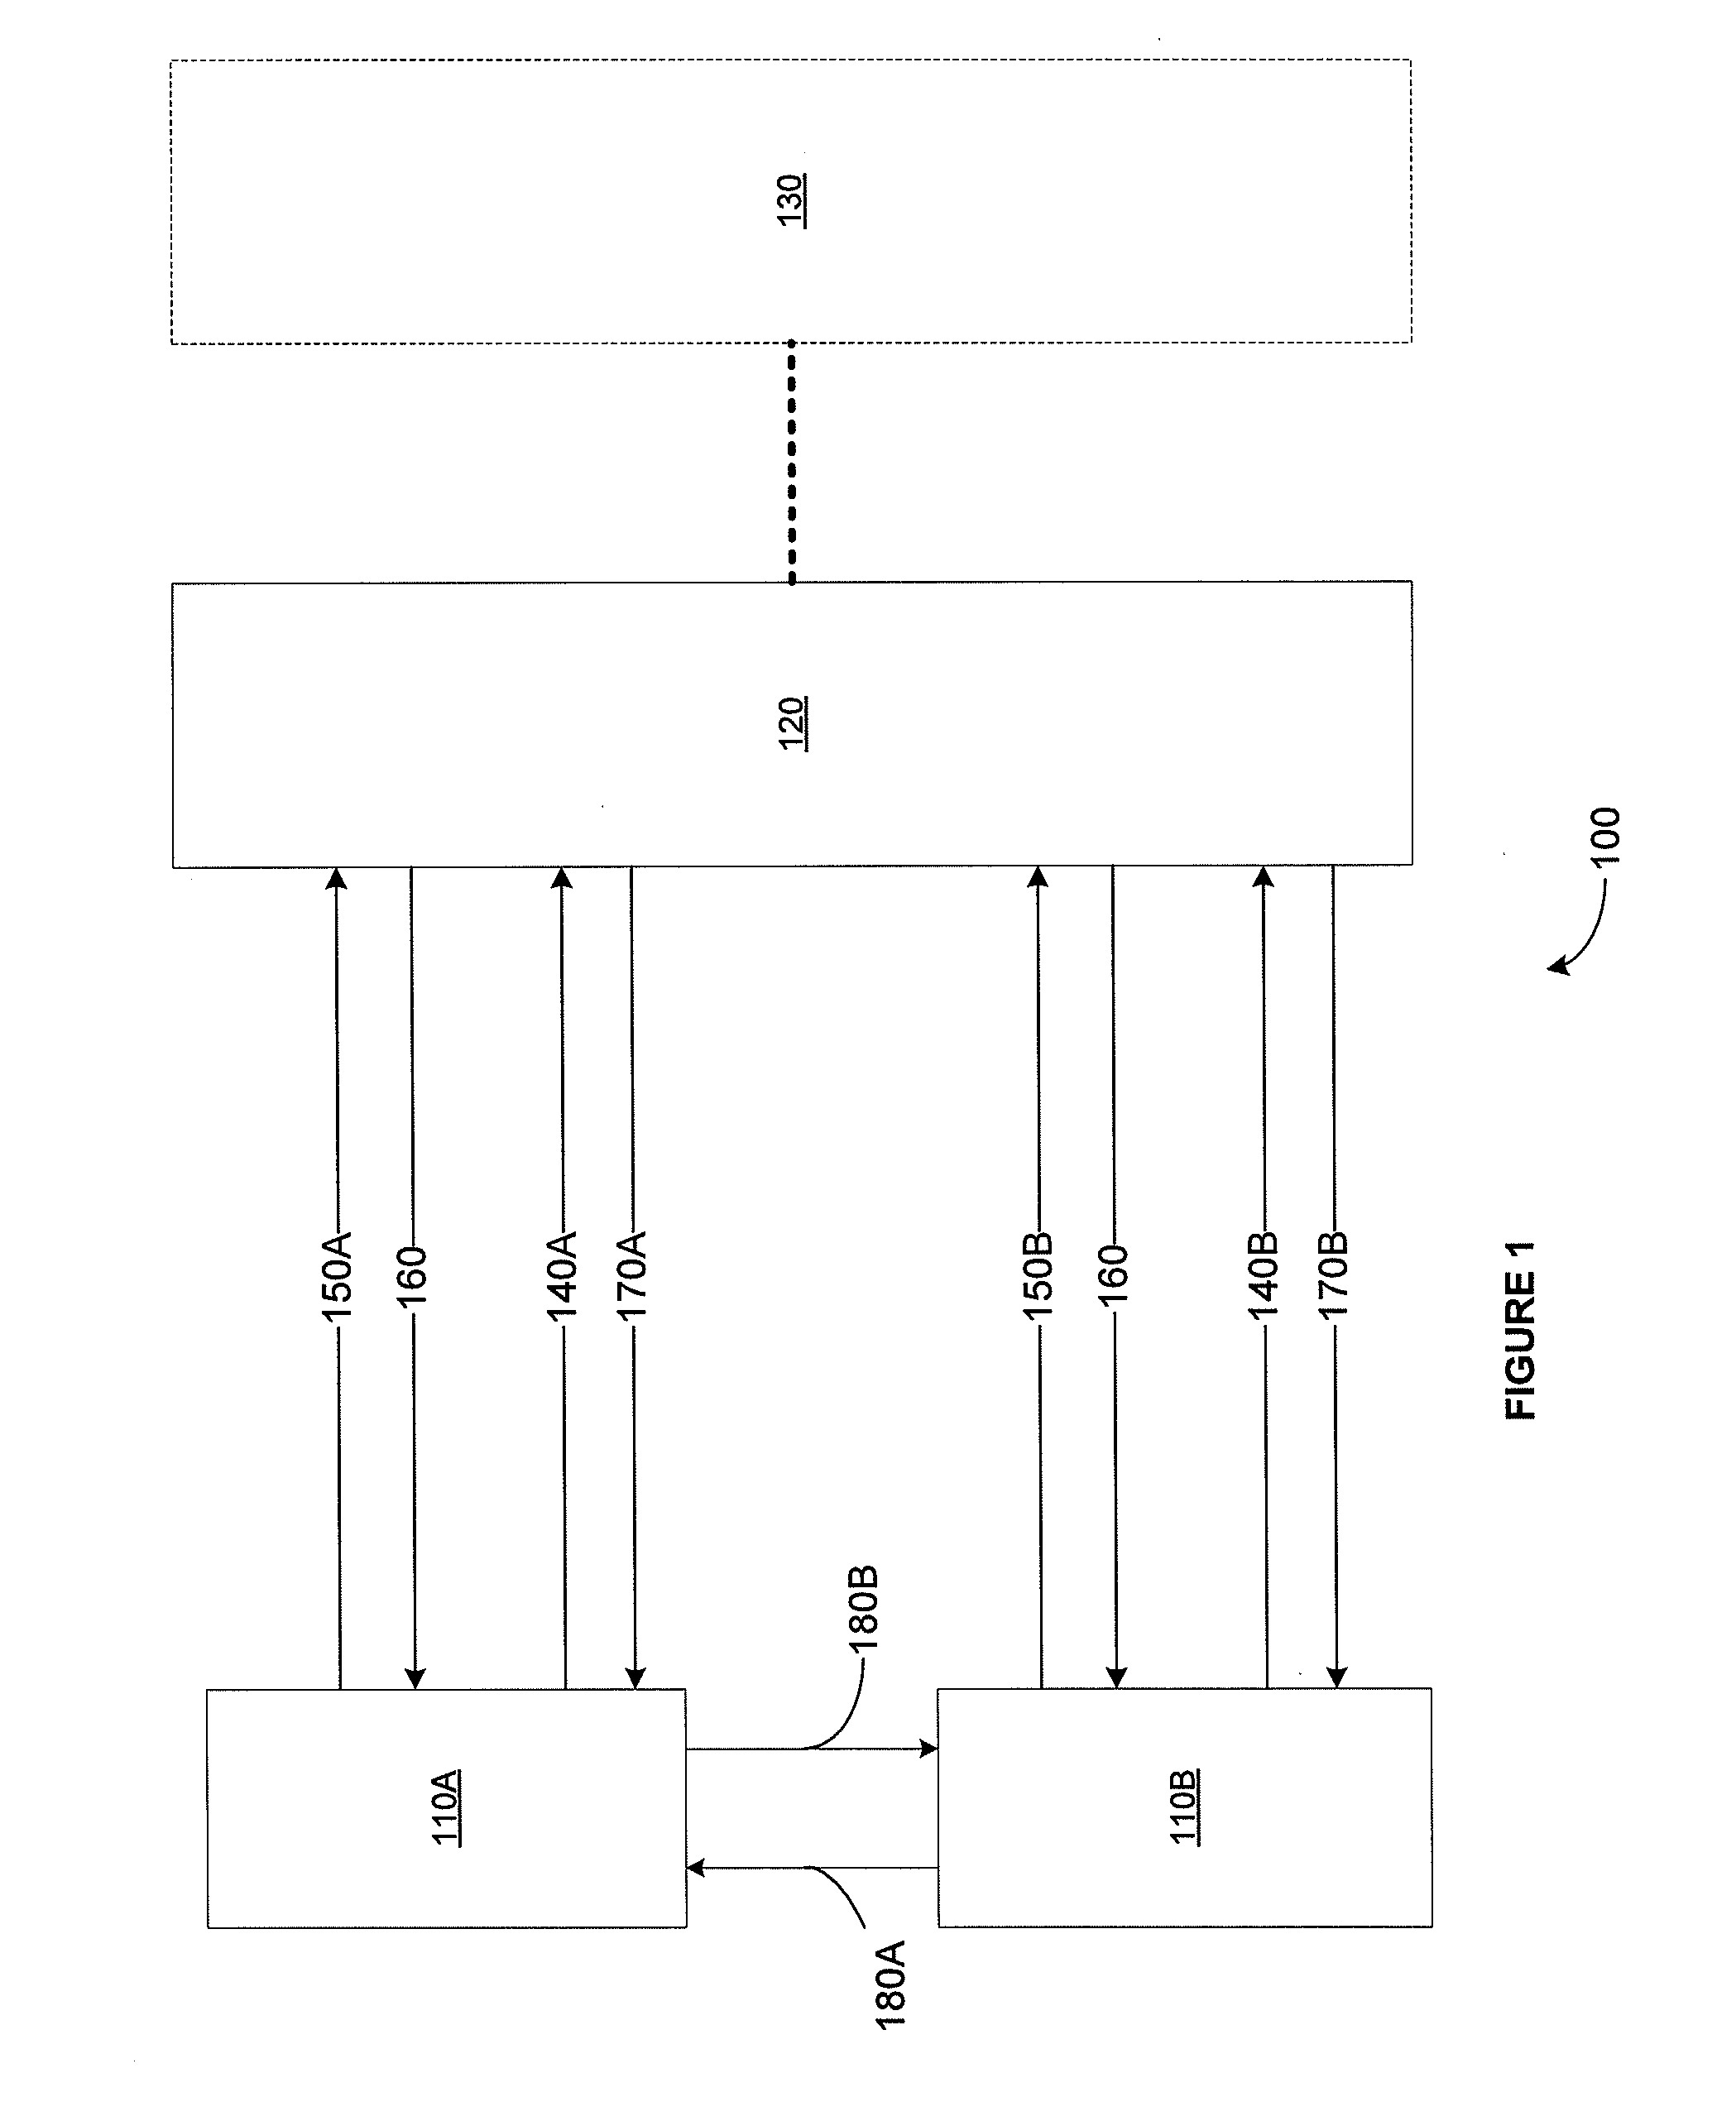 Method and apparatus for establishing a secure multicast communication session